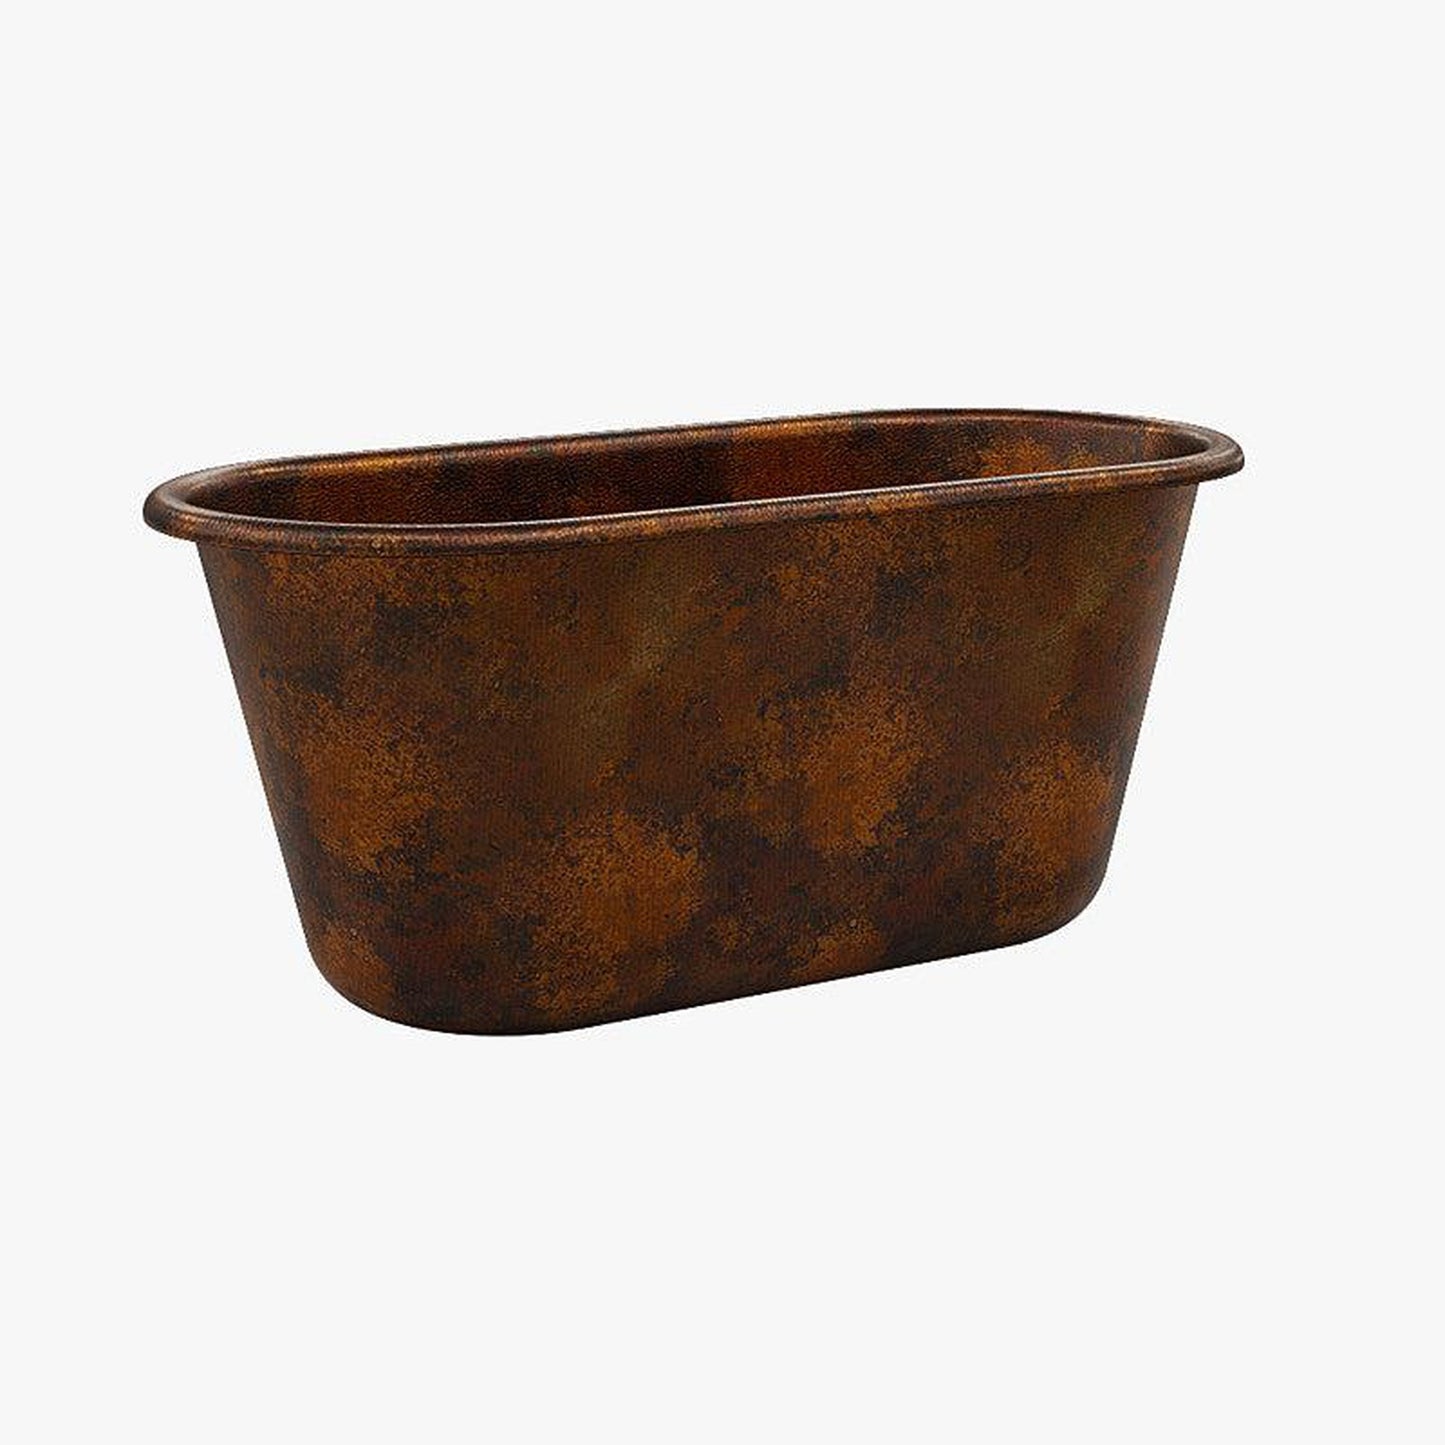 CopperSmith Heritage HX1 64" x 31" x 31" 16-Gauge Fire Copper Freestanding Bathtub With Fire Copper Interior and Oil Rubbed Bronze Lift & Turn Tub Drain and Oil Rubbed Bronze Tub Filler